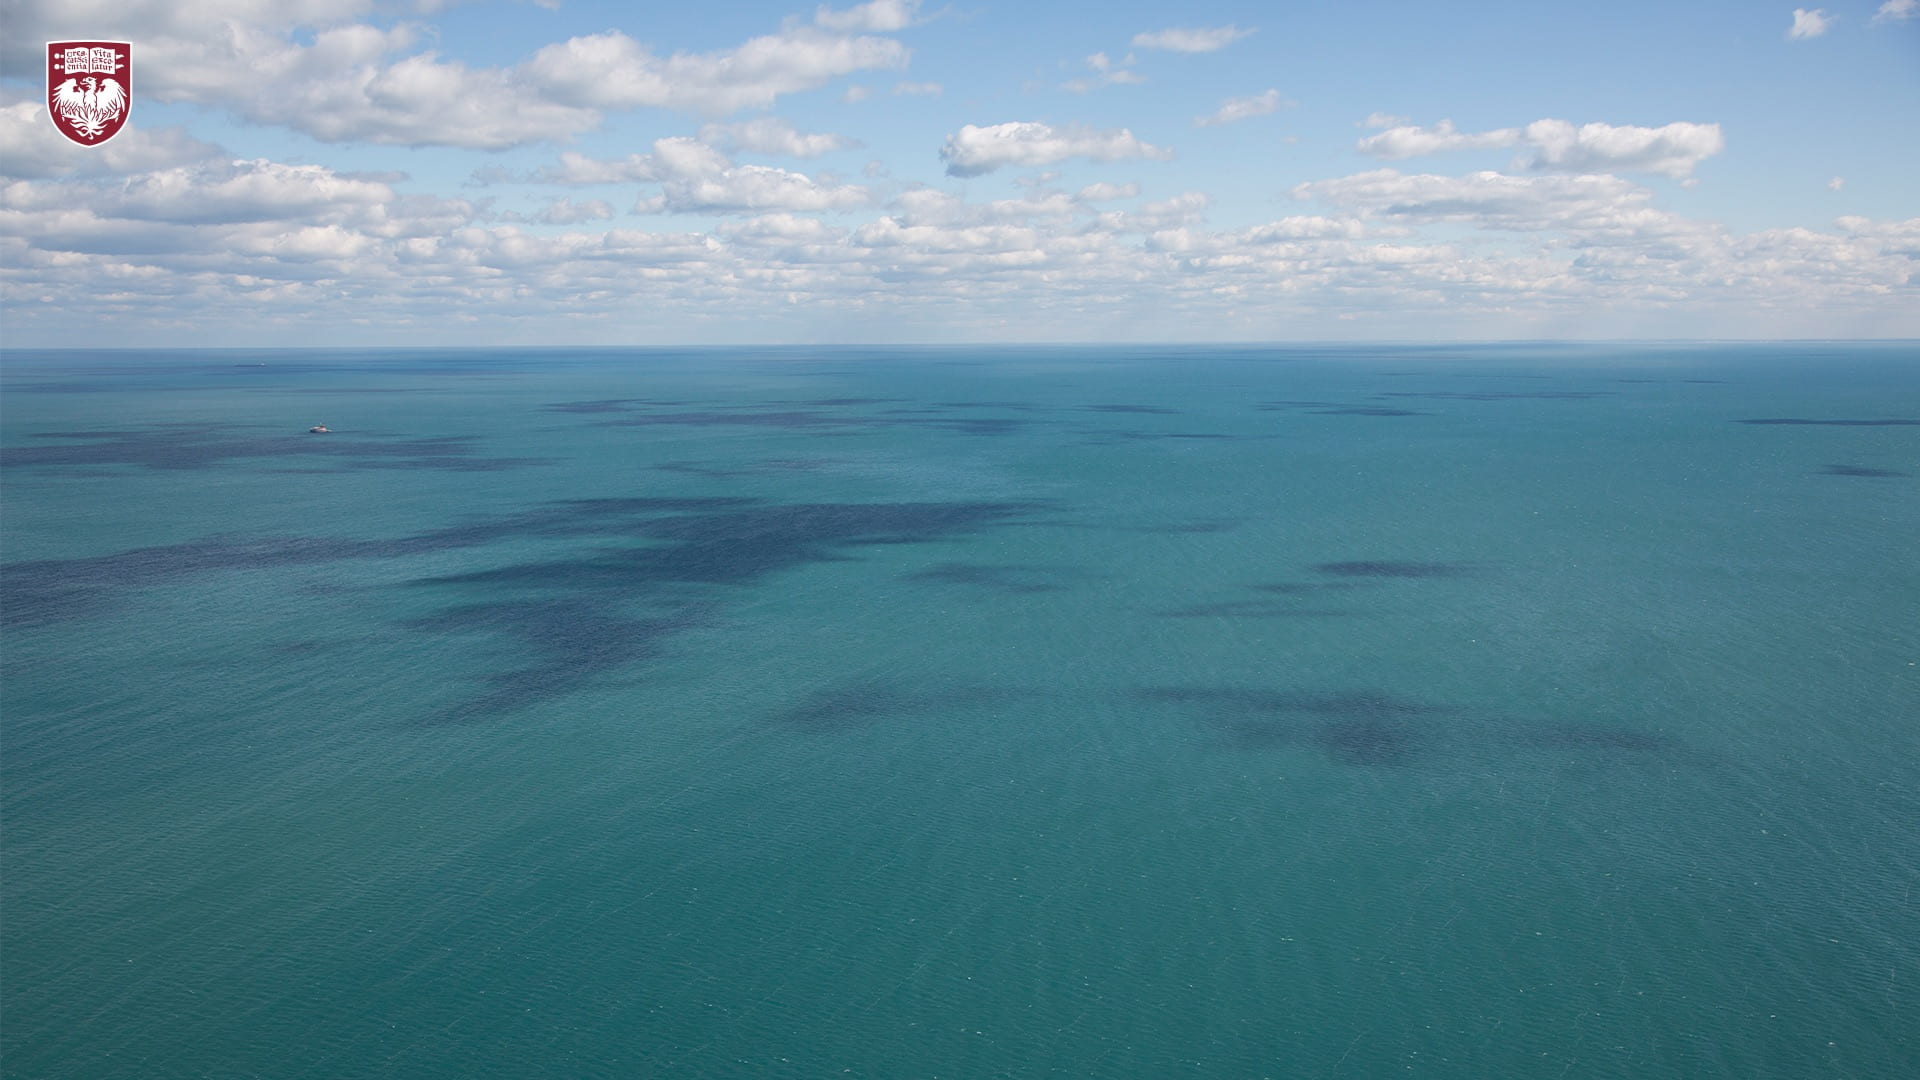 Aerial view of Lake Michigan’s blue water and blue sky with clouds